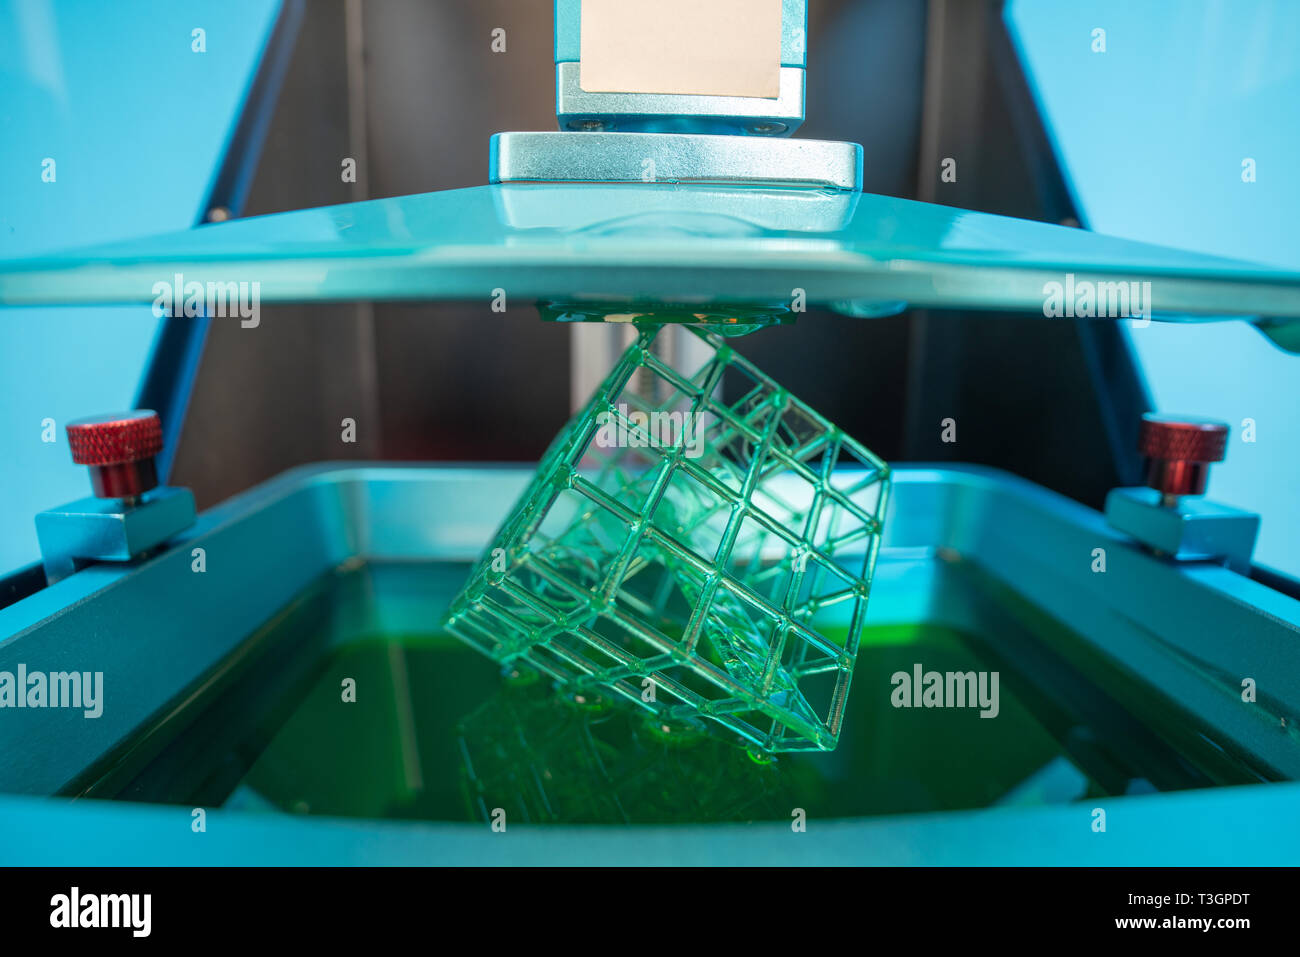 Stereolithography photopolymer DPL 3d printer Stock Photo - Alamy